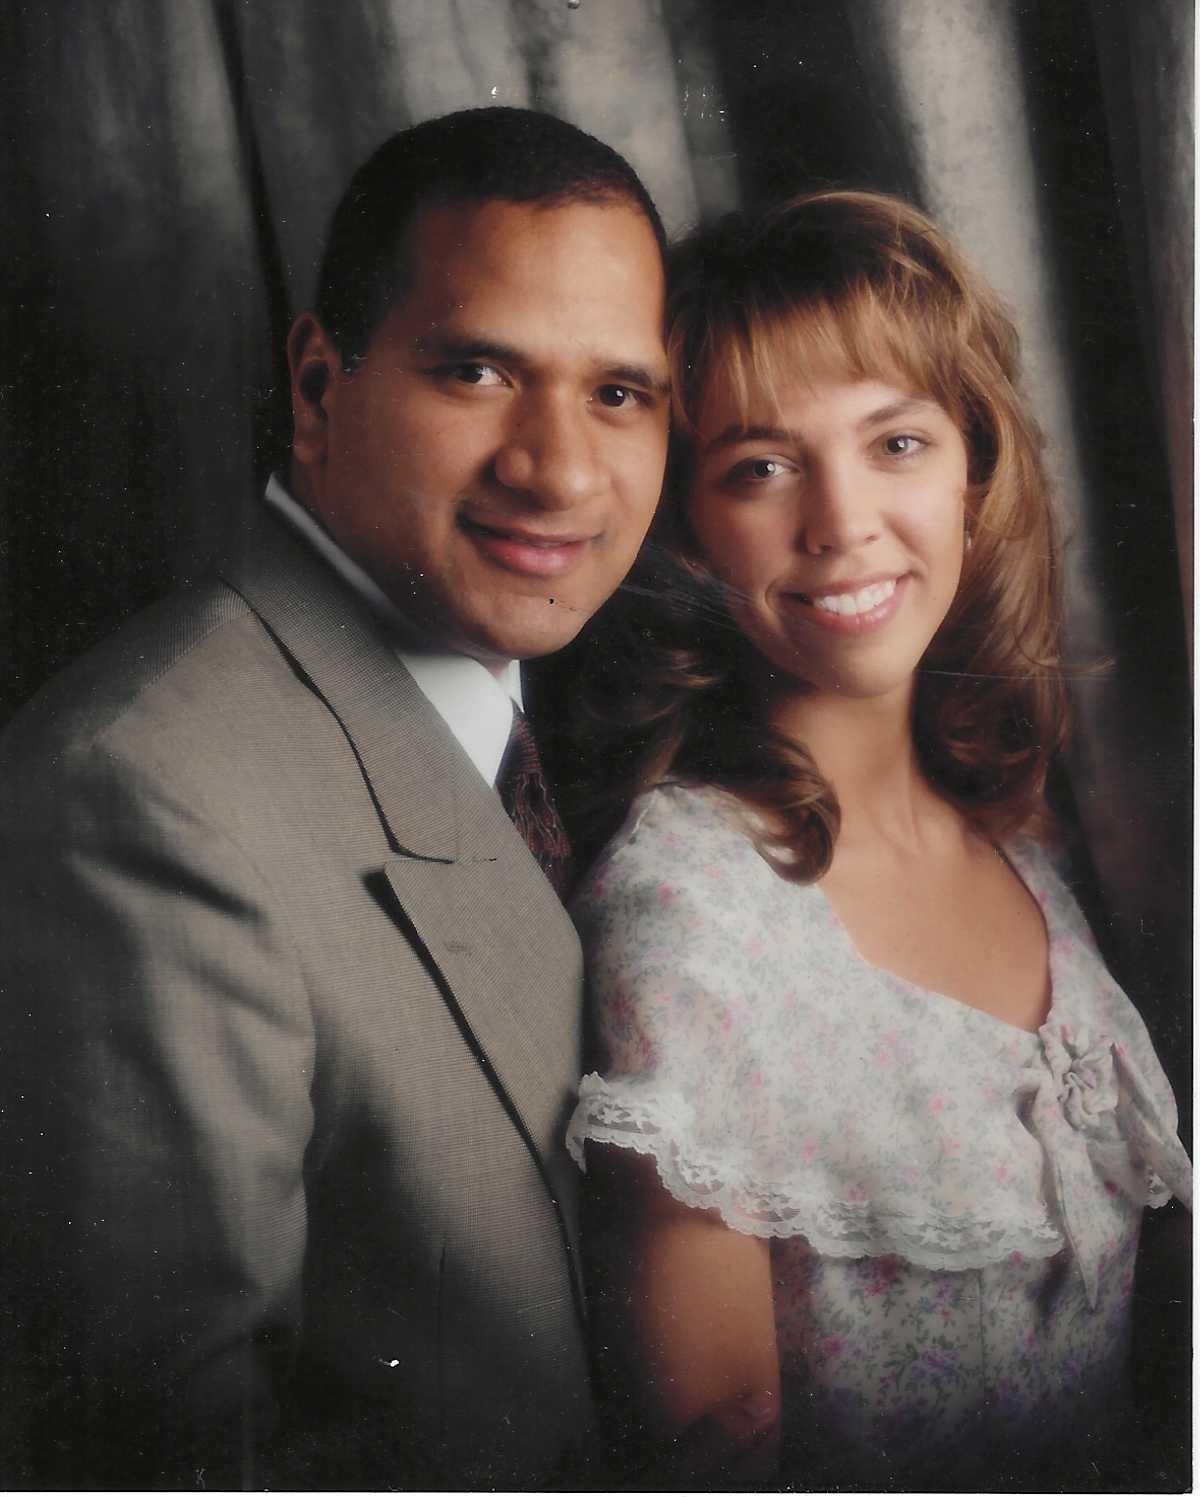 Dear family and friends, as many of you know I’m an immigrant from the Kingdom of Tonga. I started my humble beginnings in Northern California. I served an LDS mission in Salt Lake City, then married my wife Kristi, a local with pioneer roots. We raised 5 kids and now have 2 grandchildren. I helped provide for our family by serving as a Salt Lake City police officer for 20 years. I retired with honors and a full pension. We’ve been involved in this licensed profession since 2016. My father was a life insurance agent. He said that life insurance is the foundation for building wealth and that the transfer of risk is how you protect your finances. Although at the time that sounded foreign to me, I now understand it fully. Now we help others understand by having a career in the financial industry. We love what we do! As a broker Kristi and I operate our own book of business, and we help train and license new agents to do the work of protecting the most important asset: you! Thank you to all those who’ve helped us, we couldn’t have done it without you. Your friends, Kristi and Joe.